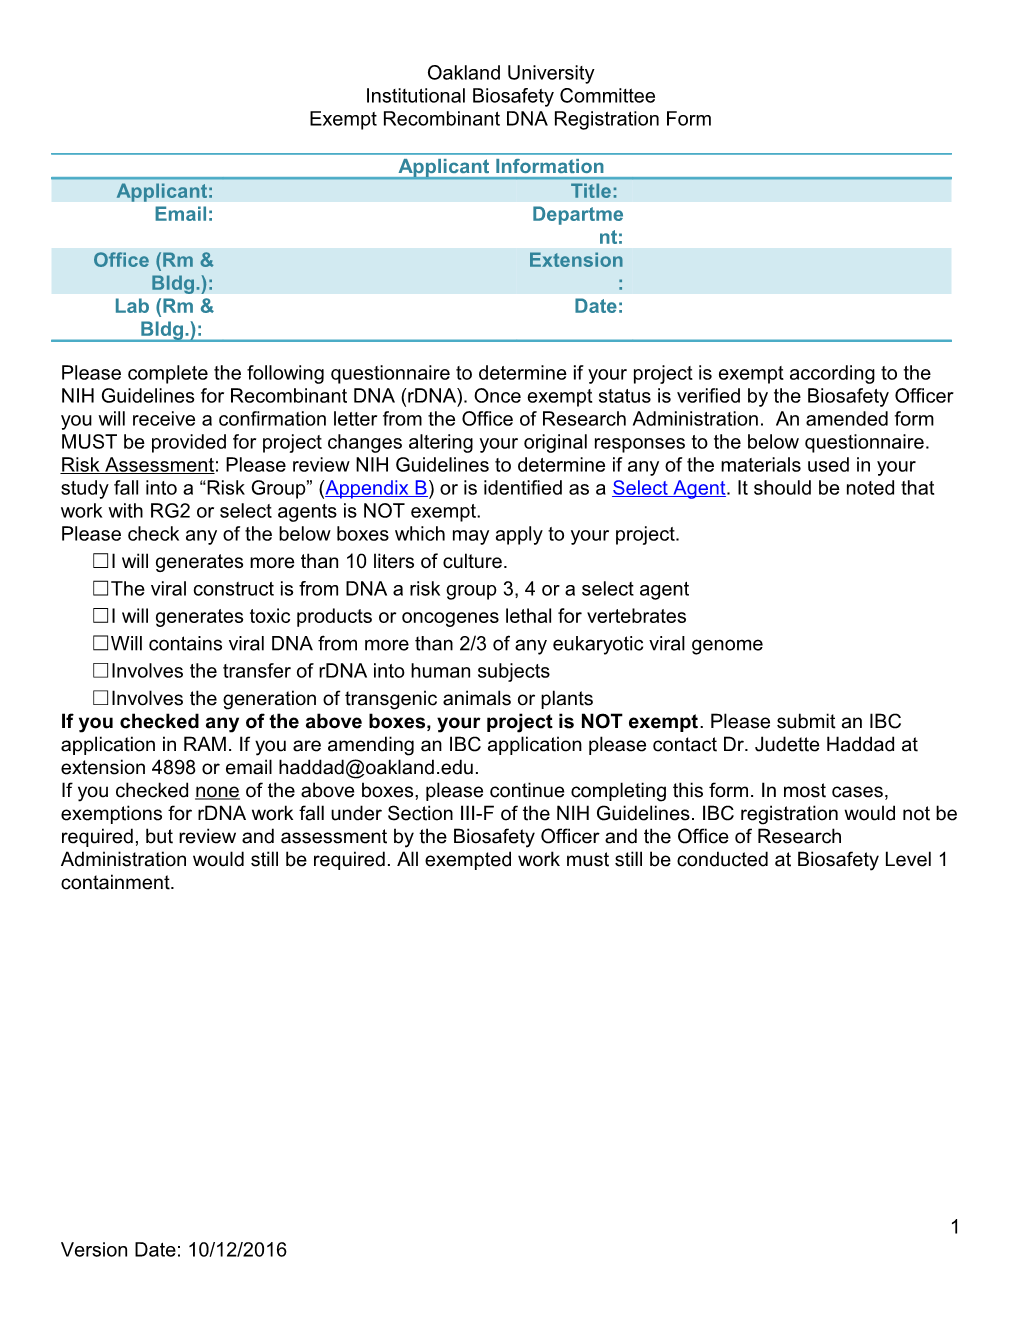 Oakland University Institutional Biosafety Committee Exempt Recombinant DNA Registration Form